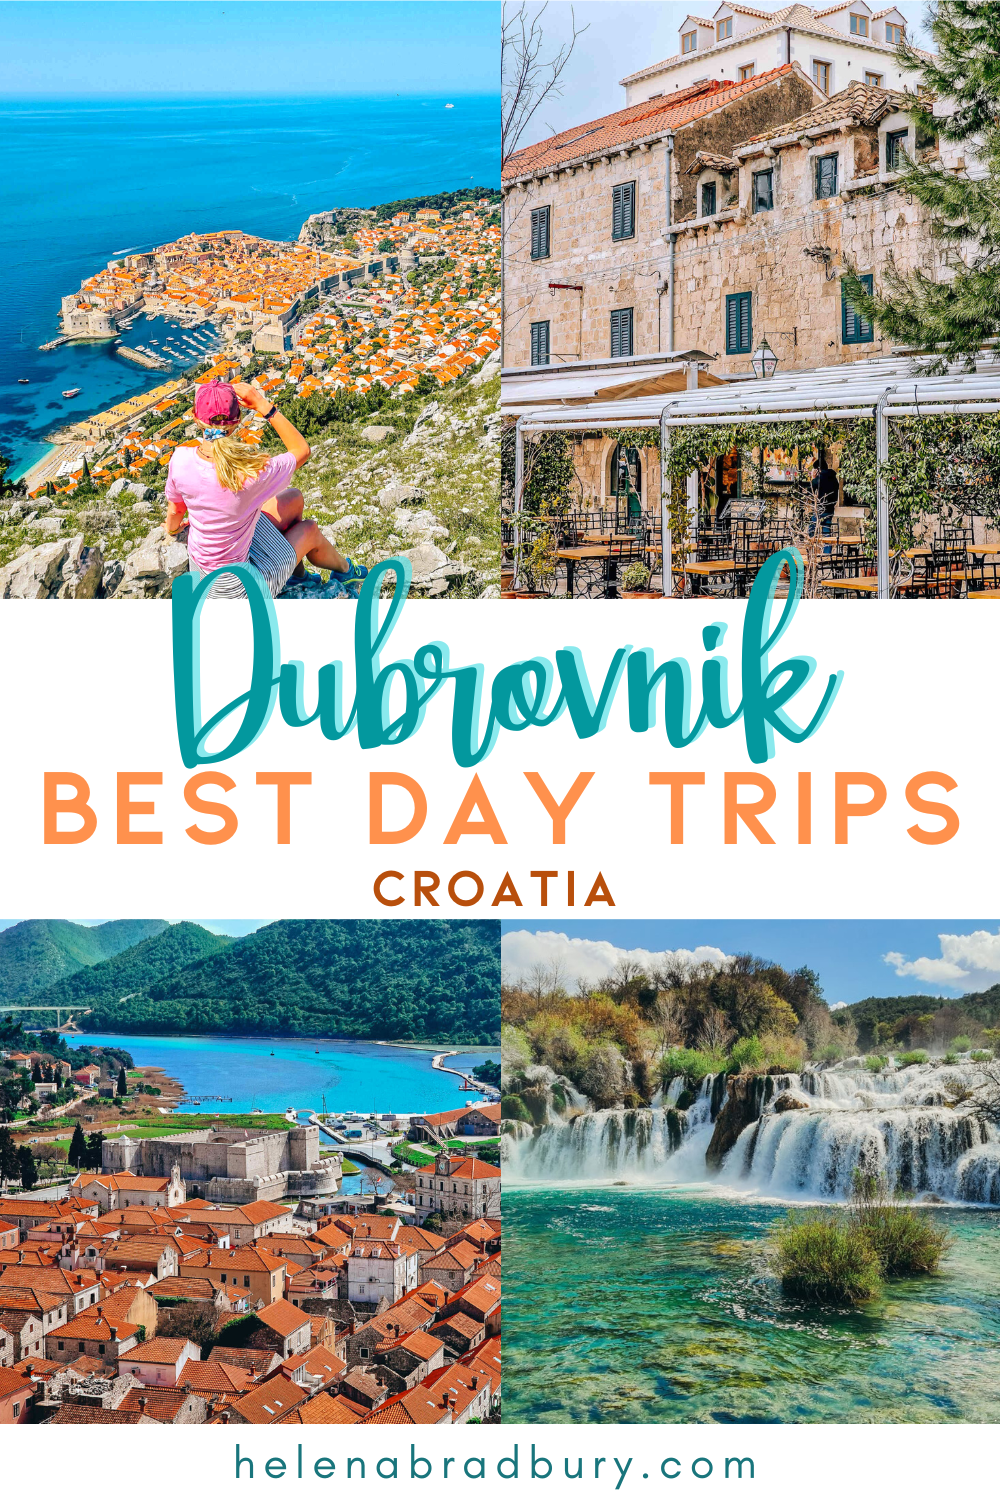 Discover incredible day trips from Dubrovnik! From my favourite hidden gems to the best island boat trips or food tours. Plan your perfect Dubrovnik day trip now. | dubrovnik day trips | best day trips from dubrovnik croatia | montenegro day trip fro